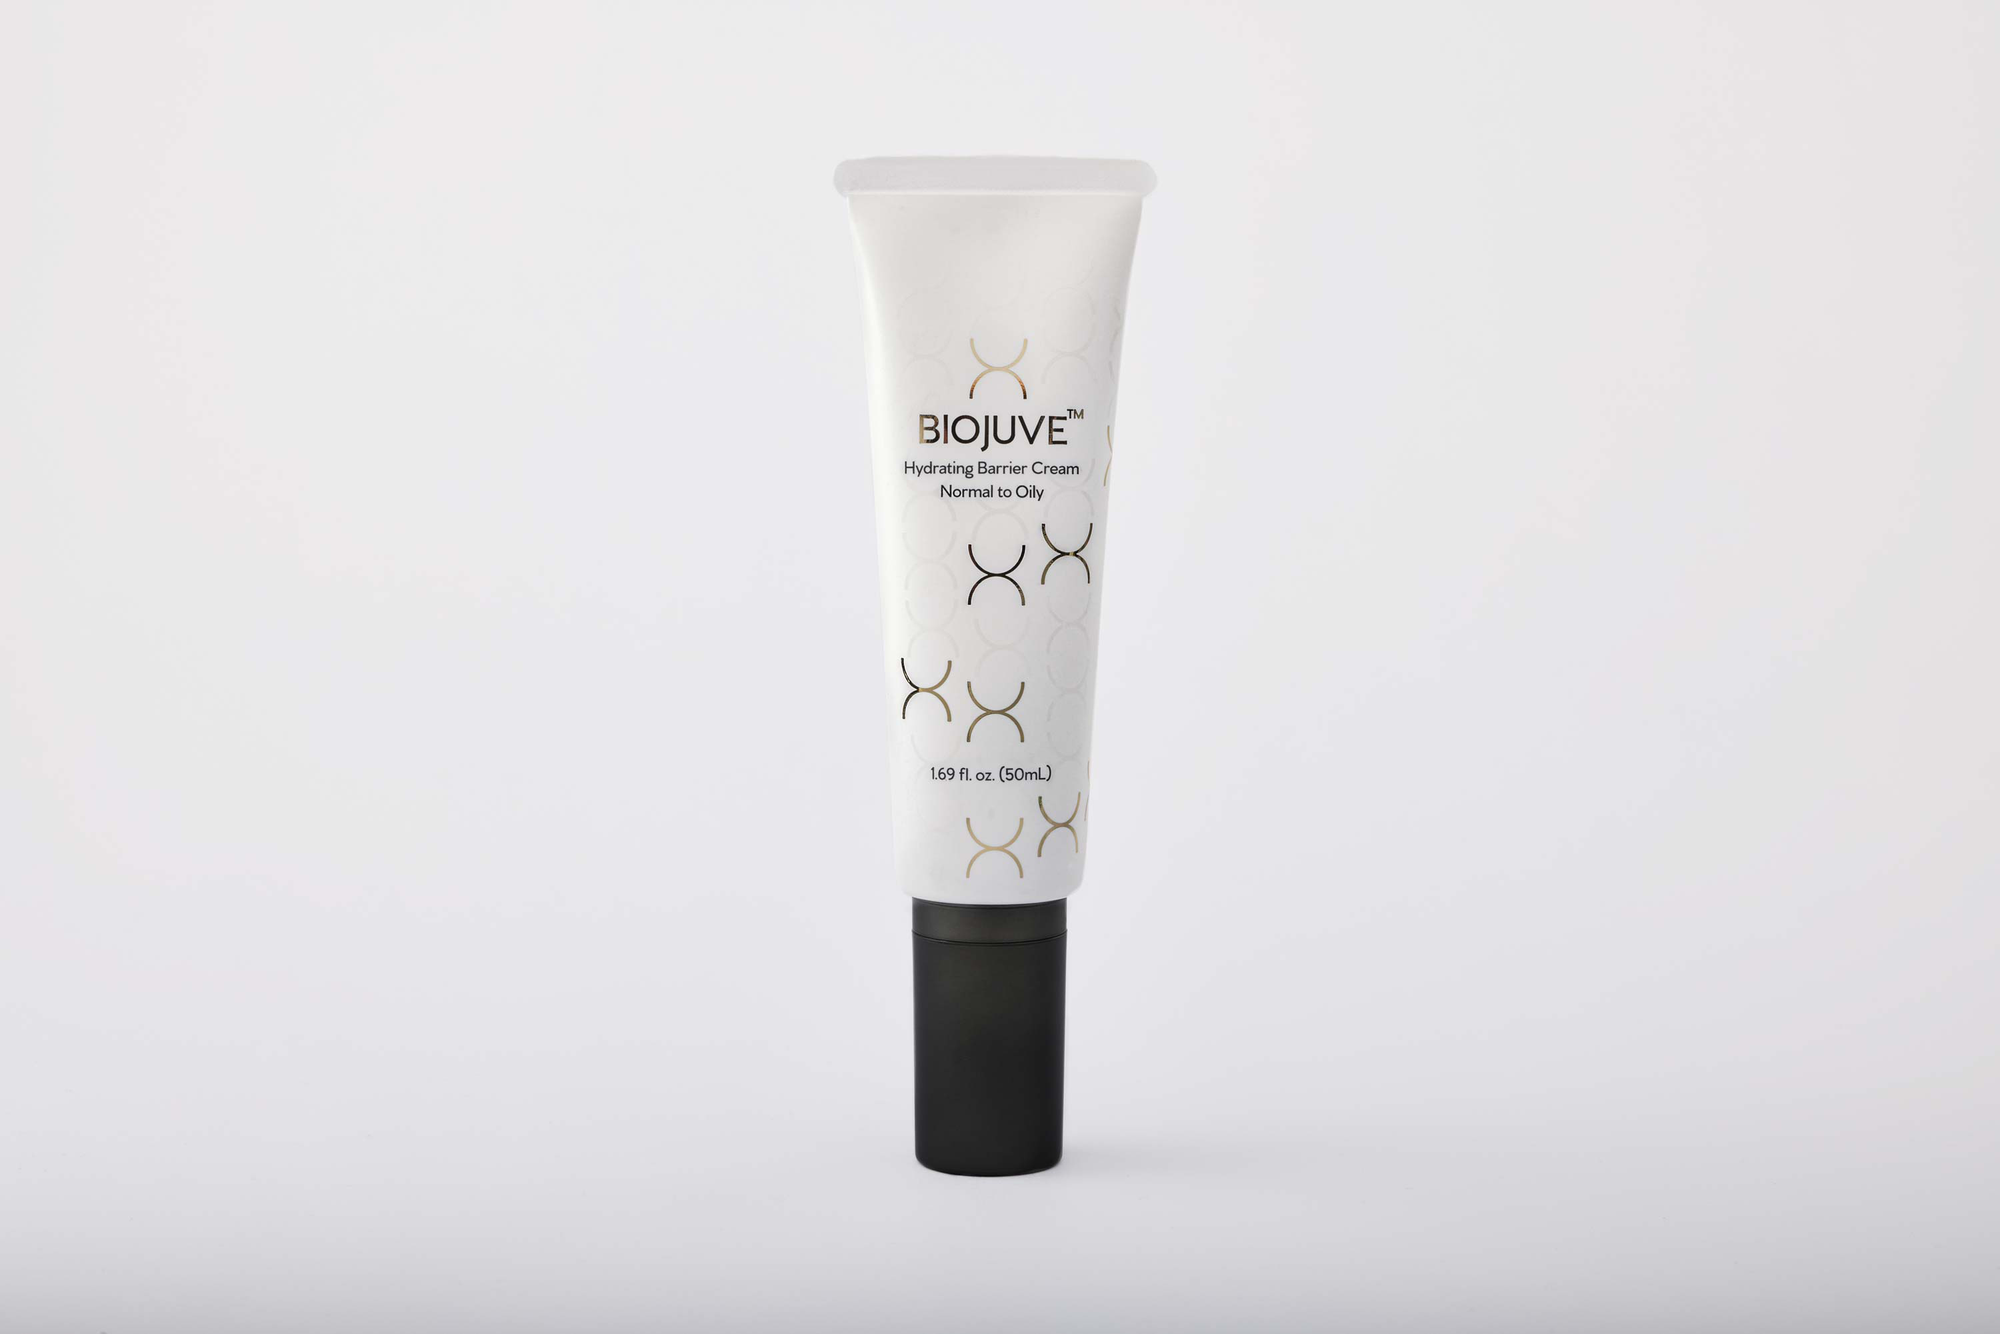 Biojuve Hydrating Barrier Cream (normal to dry)